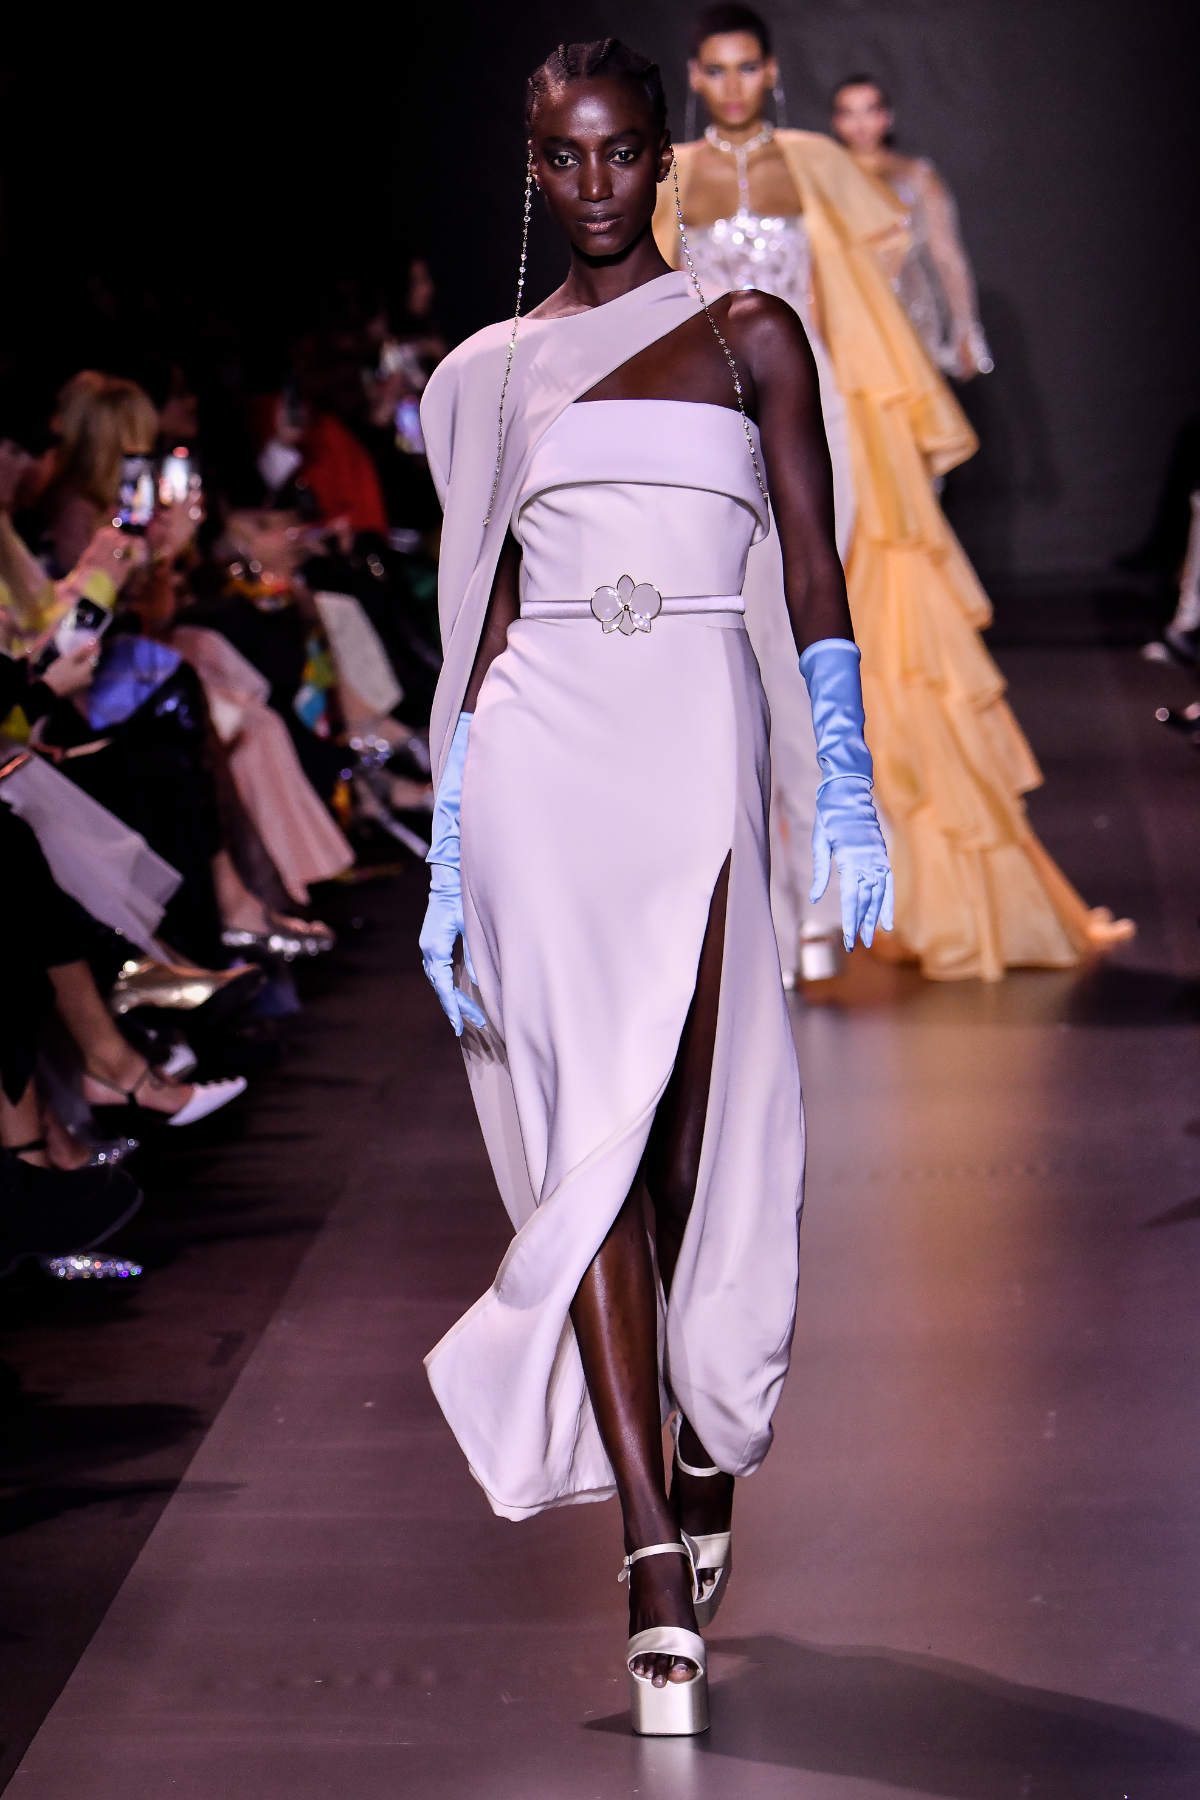 Maison Georges Hobeika Presents Its New Haute Couture Spring Summer 2023 Collection: Small Talks